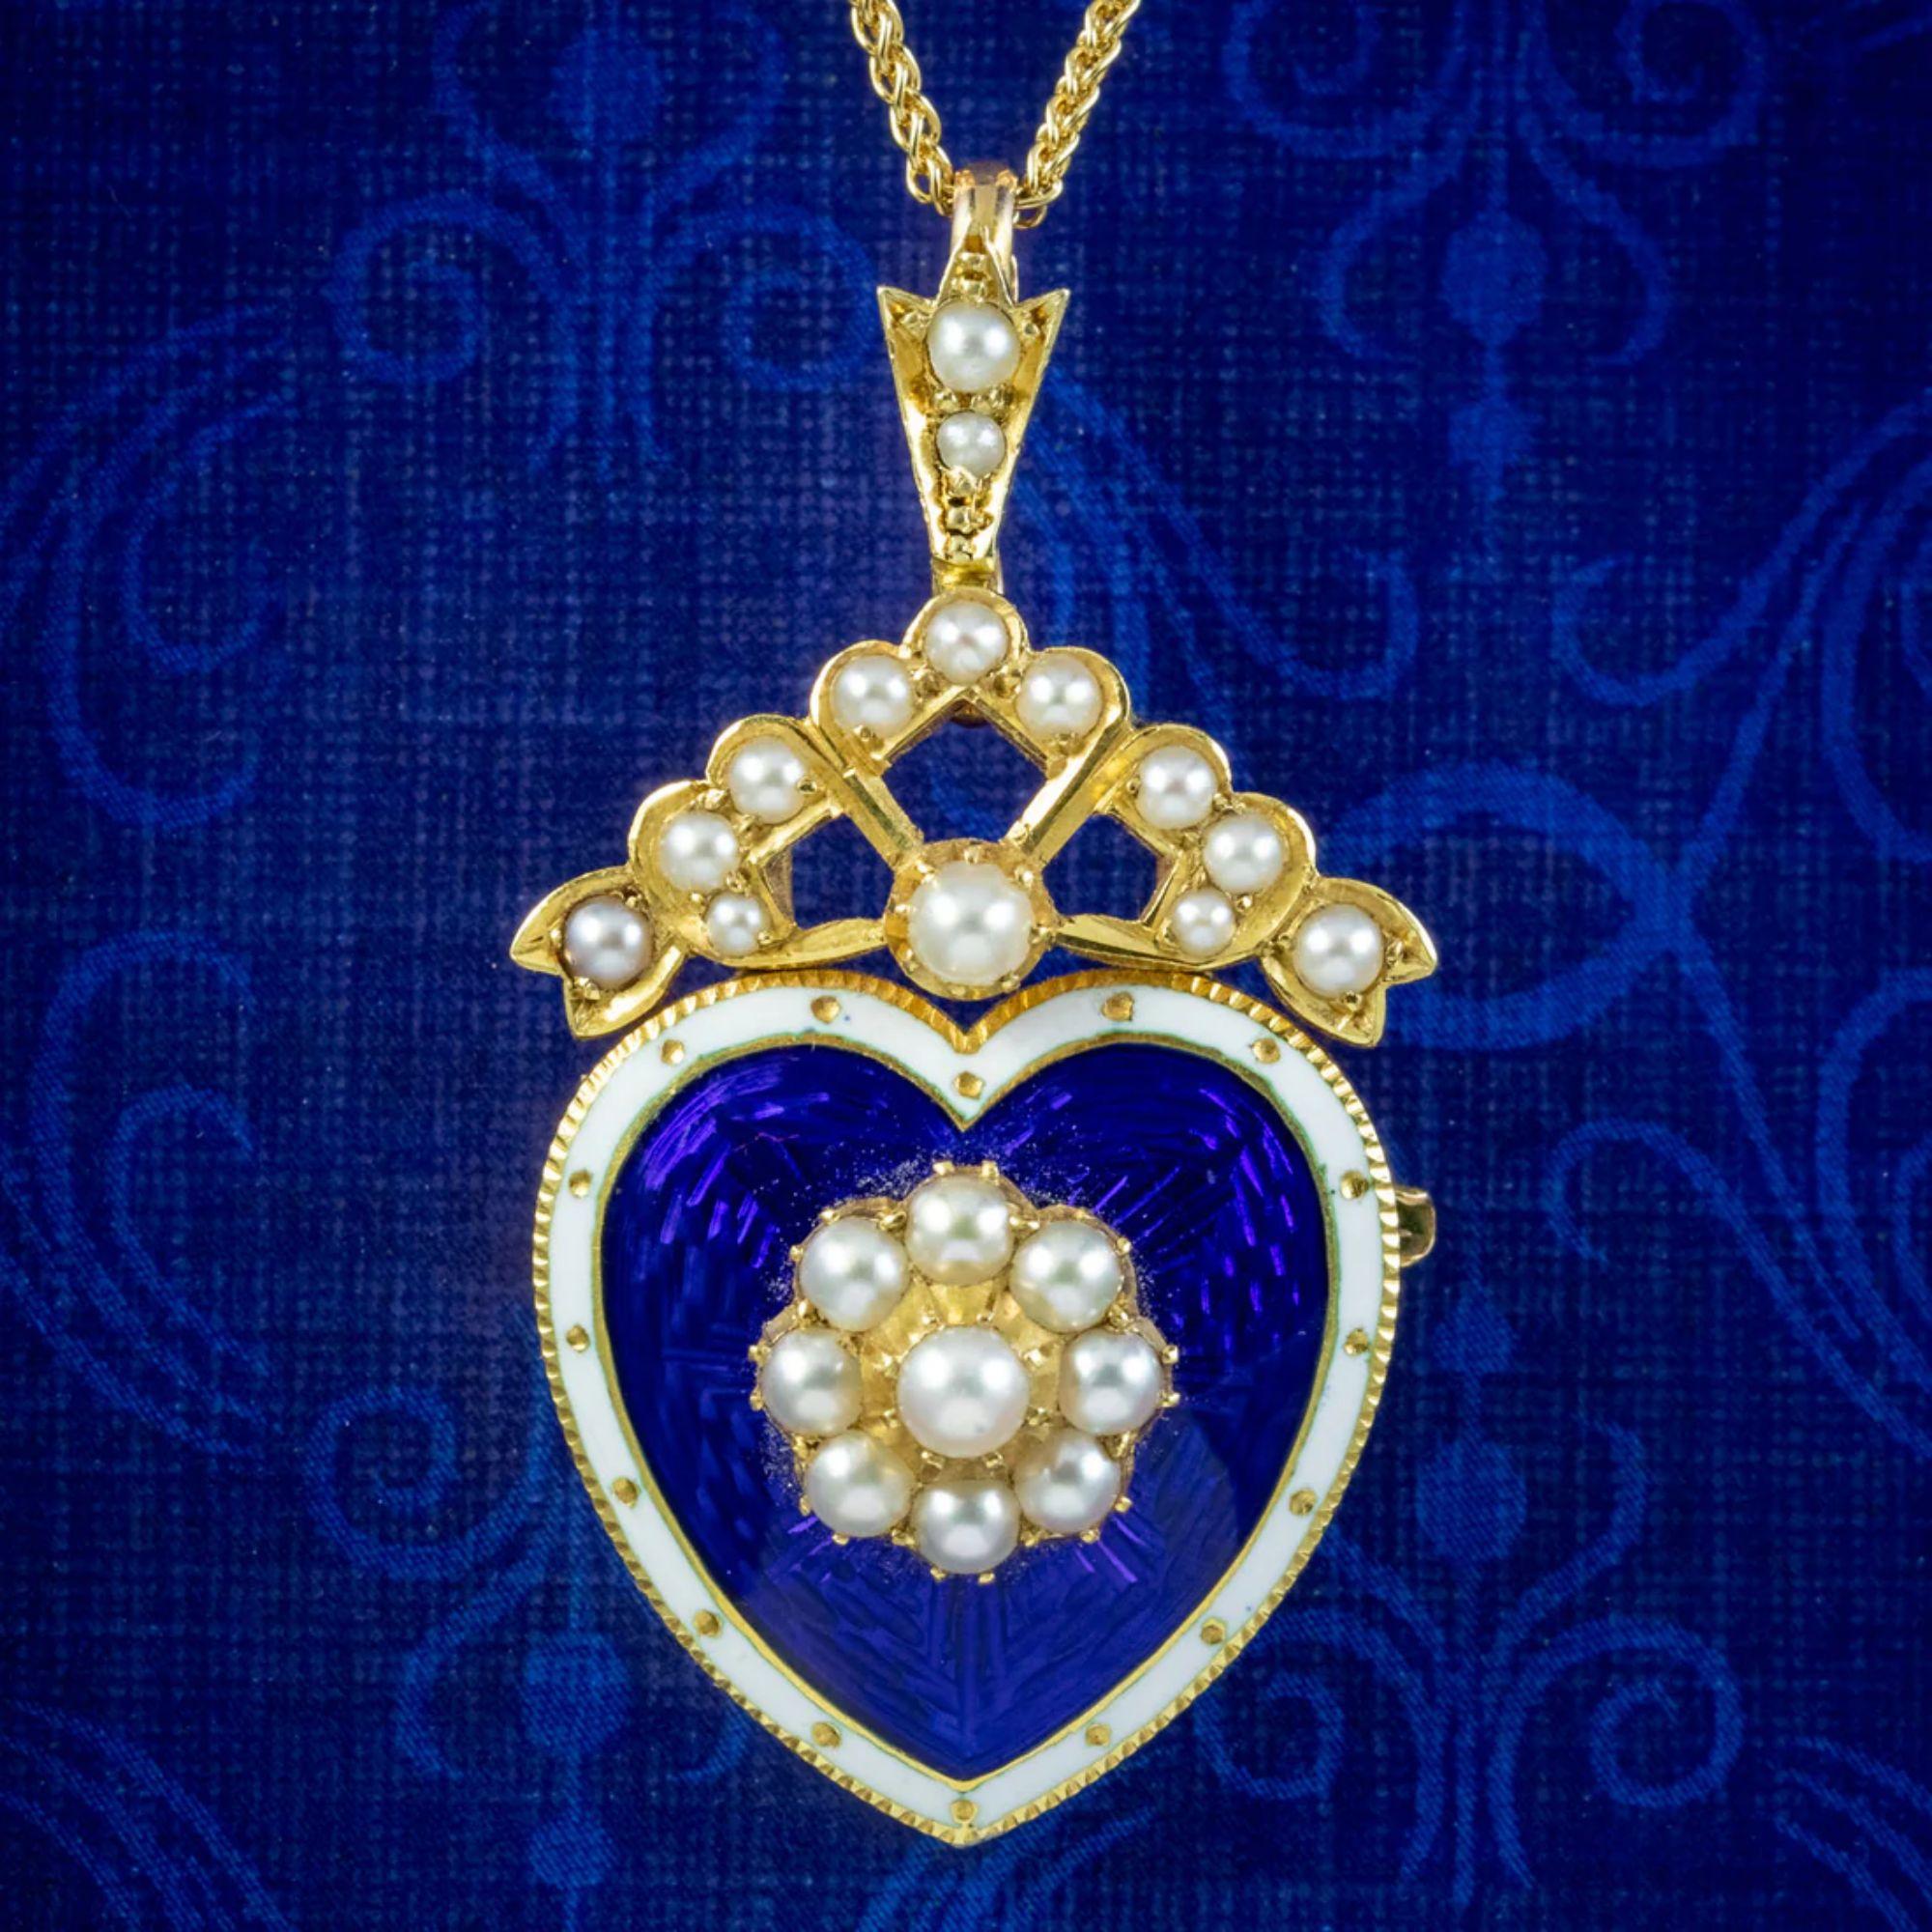 Edwardian Pearl Heart Pendant Necklace in 18Ct Gold Blue Enamel, circa 1901-1910 For Sale 1